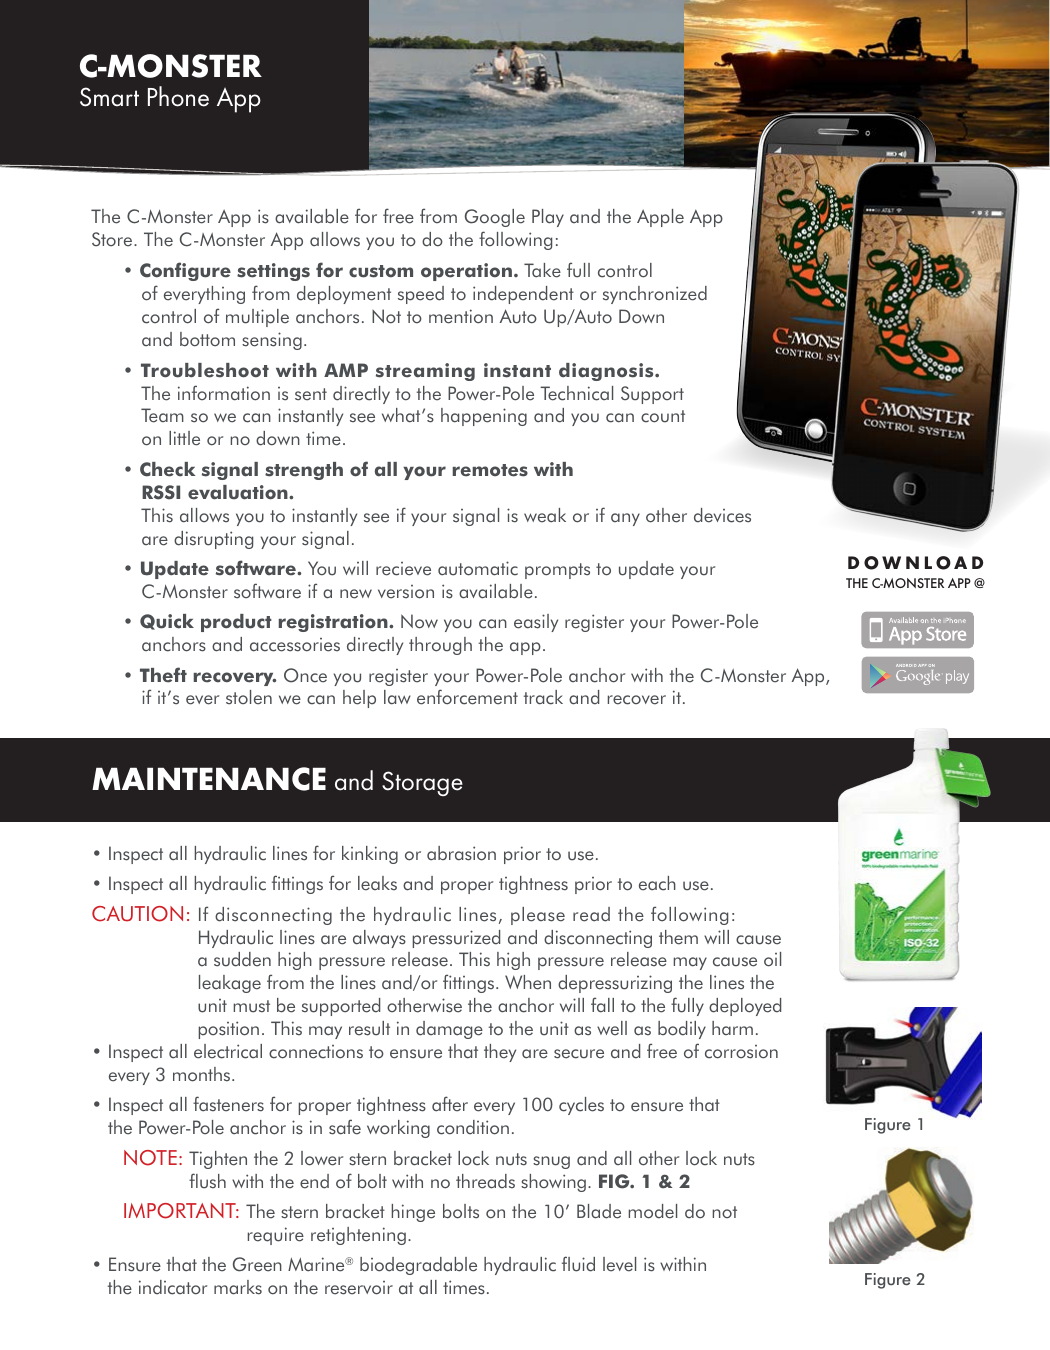 DOWNLOAD THE C-MONSTER APP @MAINTENANCE and Storage• Inspect all hydraulic lines for kinking or abrasion prior to use.• Inspect all hydraulic ﬁttings for leaks and proper tightness prior to each use.CAUTION:  If disconnecting the hydraulic lines, please read the following: Hydraulic lines are always pressurized and disconnecting them will cause a sudden high pressure release. This high pressure release may cause oil leakage from the lines and/or ﬁttings. When depressurizing the lines the unit must be supported otherwise the anchor will fall to the fully deployed position. This may result in damage to the unit as well as bodily harm.• Inspect all electrical connections to ensure that they are secure and free of corrosion every 3 months.• Inspect all fasteners for proper tightness after every 100 cycles to ensure that the Power-Pole anchor is in safe working condition.NOTE:  Tighten the 2 lower stern bracket lock nuts snug and all other lock nuts ﬂush with the end of bolt with no threads showing. FIG. 1 &amp; 2IMPORTANT:  The stern bracket hinge bolts on the 10’ Blade model do not require retightening. •  Ensure that the Green Marine® biodegradable hydraulic ﬂuid level is within the indicator marks on the reservoir at all times.C-MONSTER Smart Phone AppFigure 1Figure 2The C-Monster App is available for free from Google Play and the Apple App Store. The C-Monster App allows you to do the following:• Conﬁgure settings for custom operation. Take full control of everything from deployment speed to independent or synchronized control of multiple anchors. Not to mention Auto Up/Auto Down and bottom sensing.• Troubleshoot with AMP streaming instant diagnosis. The information is sent directly to the Power-Pole Technical Support  Team so we can instantly see what’s happening and you can count on little or no down time.• Check signal strength of all your remotes with RSSI evaluation. This allows you to instantly see if your signal is weak or if any other devices are disrupting your signal. • Update software. You will recieve automatic prompts to update your C-Monster software if a new version is available.• Quick product registration. Now you can easily register your Power-Pole anchors and accessories directly through the app. • Theft recovery. Once you register your Power-Pole anchor with the C-Monster App, if it’s ever stolen we can help law enforcement track and recover it.